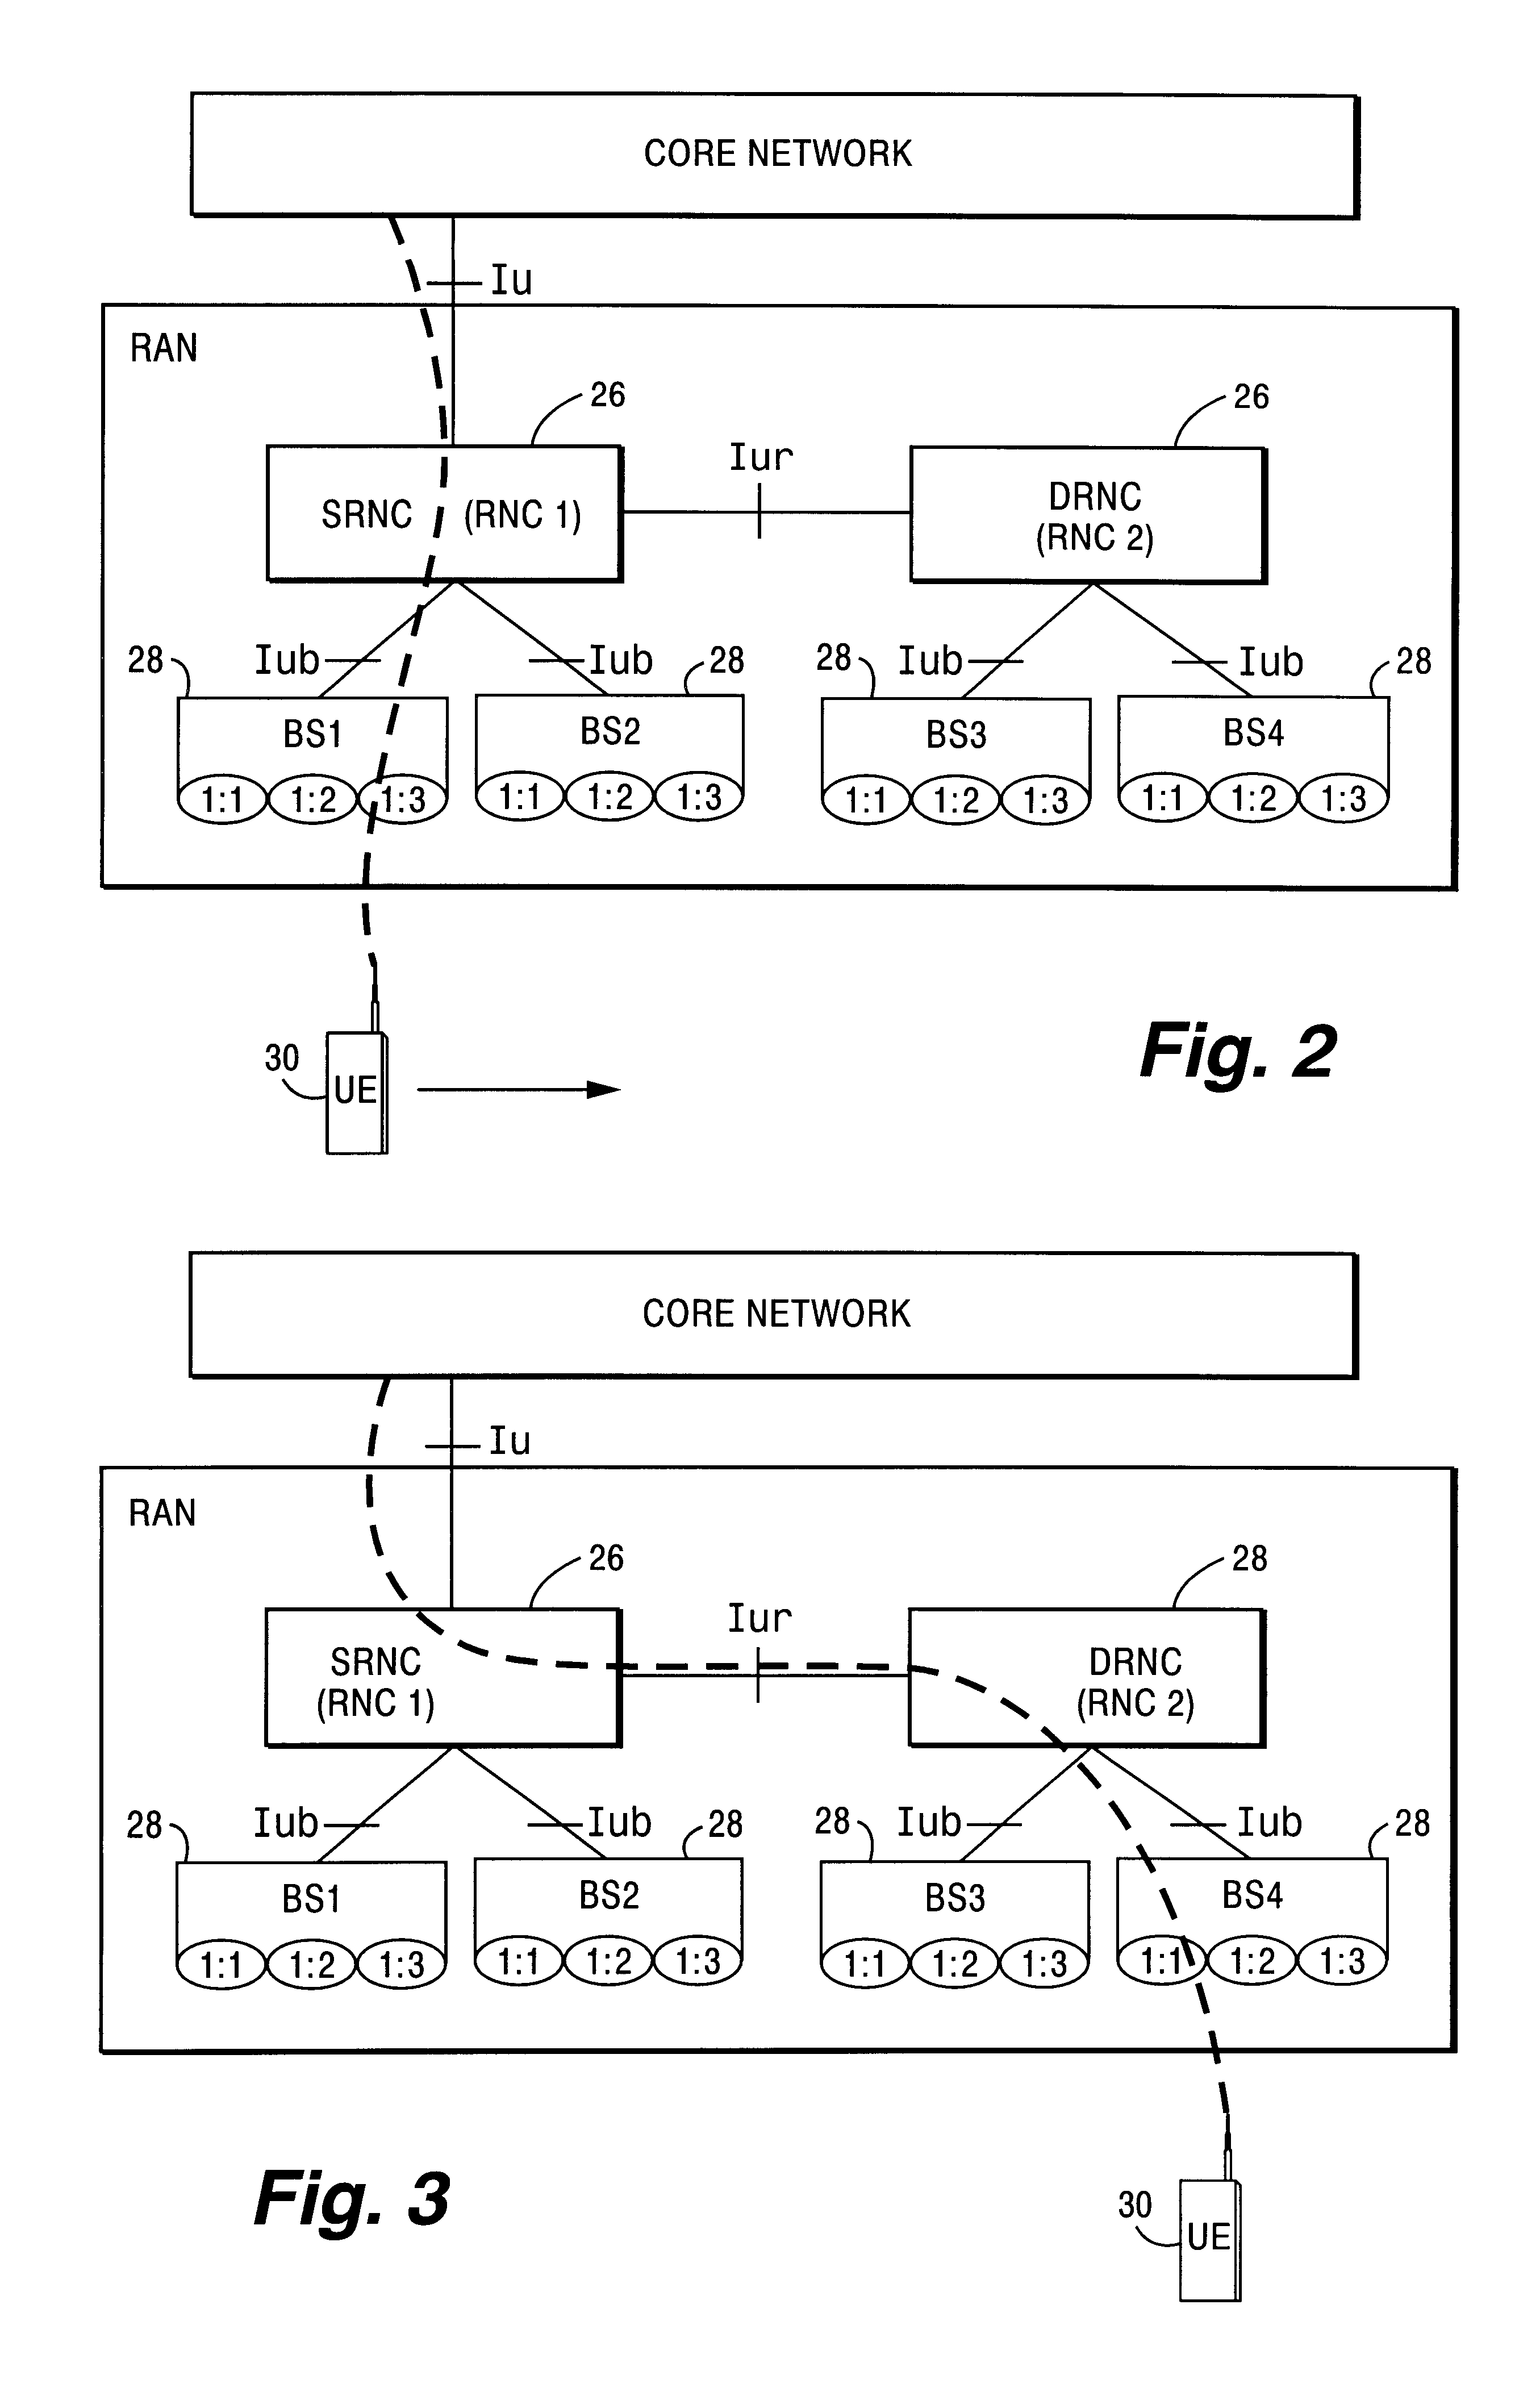 Variable transmission rate services in a radio access network